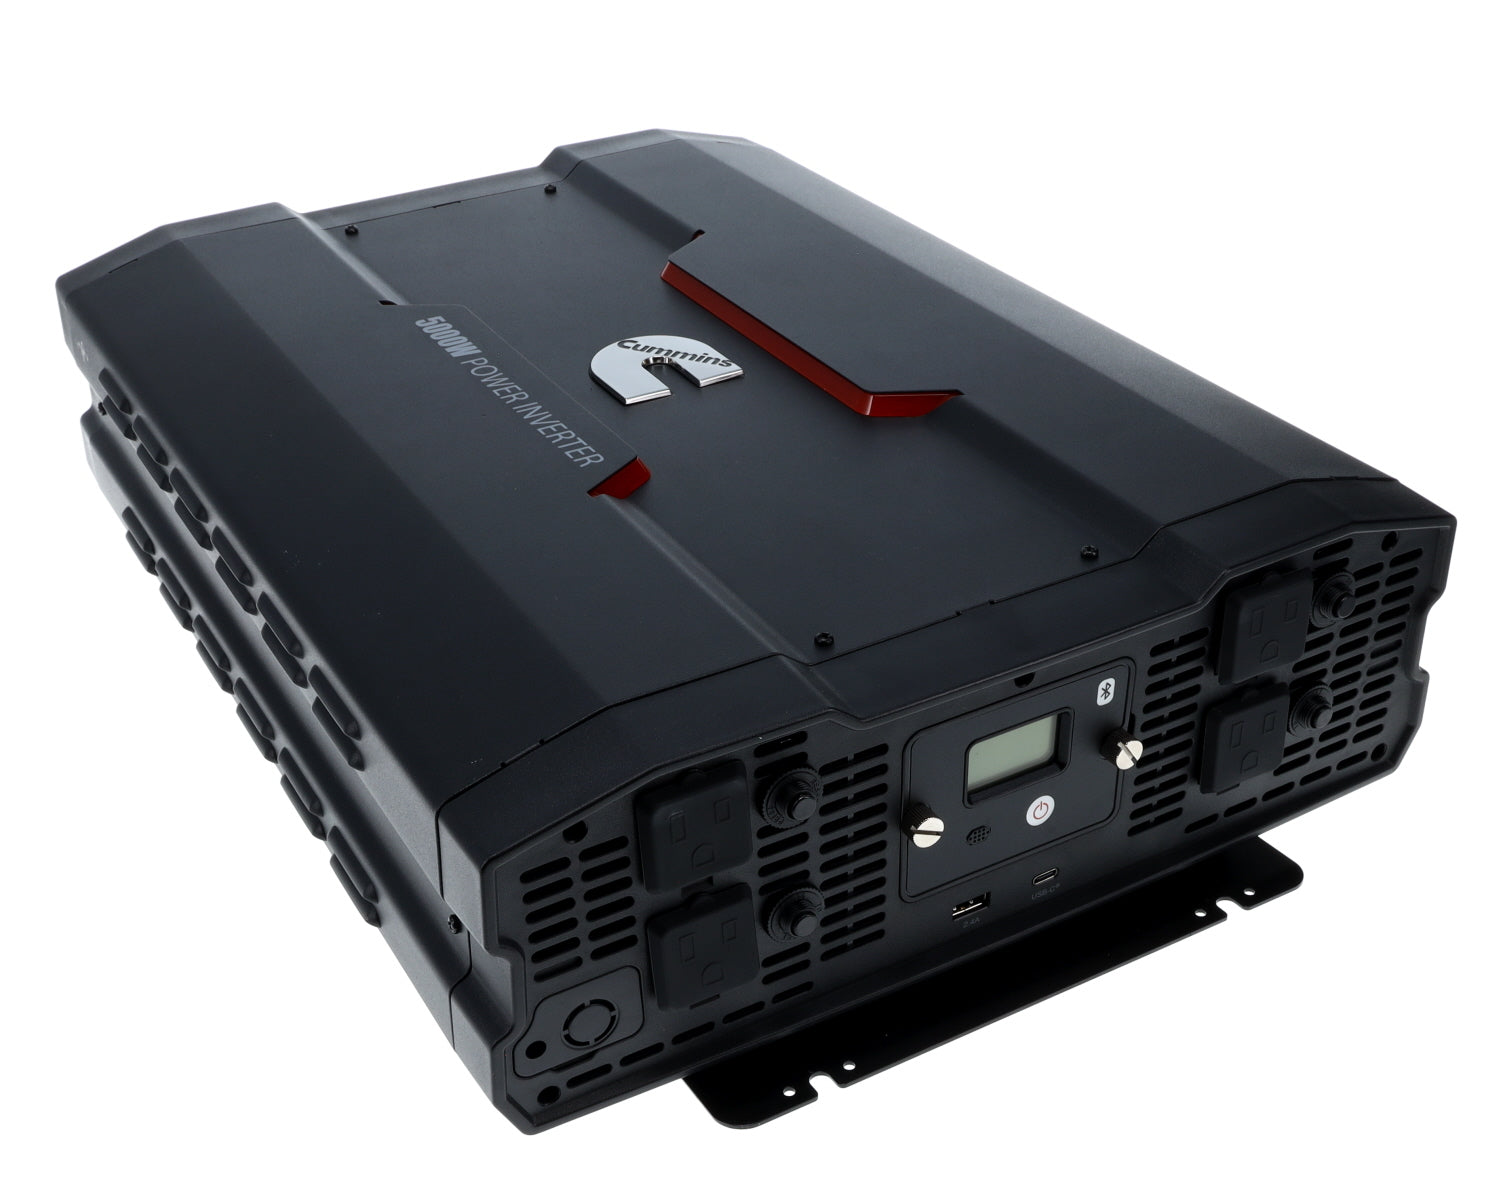 Cummins 5000 Watt Power Inverter Modified Sine Wave Truck Inverter 12V to 110 Volts Four AC Outlets Two USB Ports (Full Cable Kit Included) CMN5000W